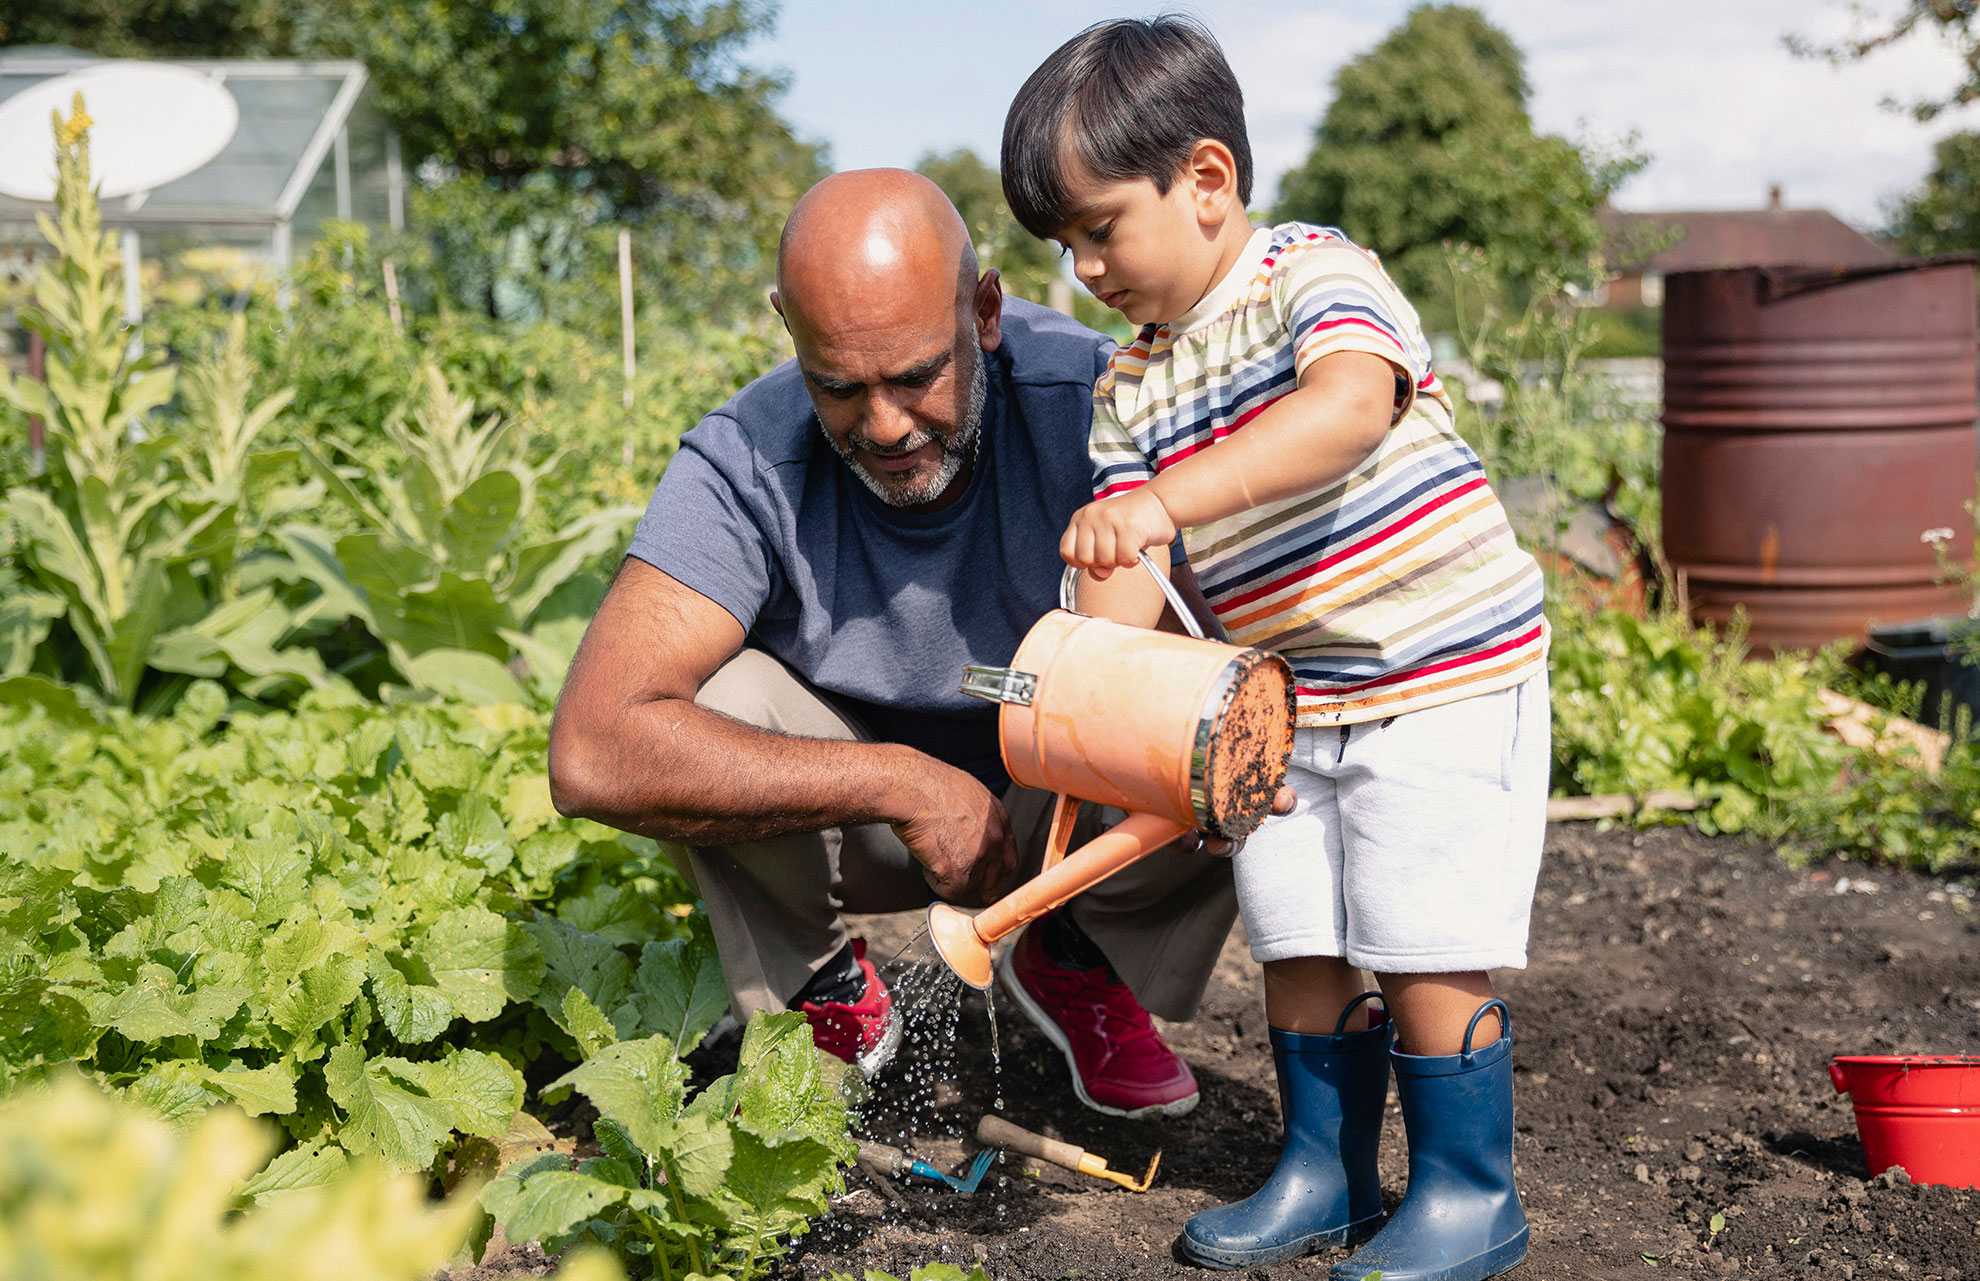 Adult and child gardening together